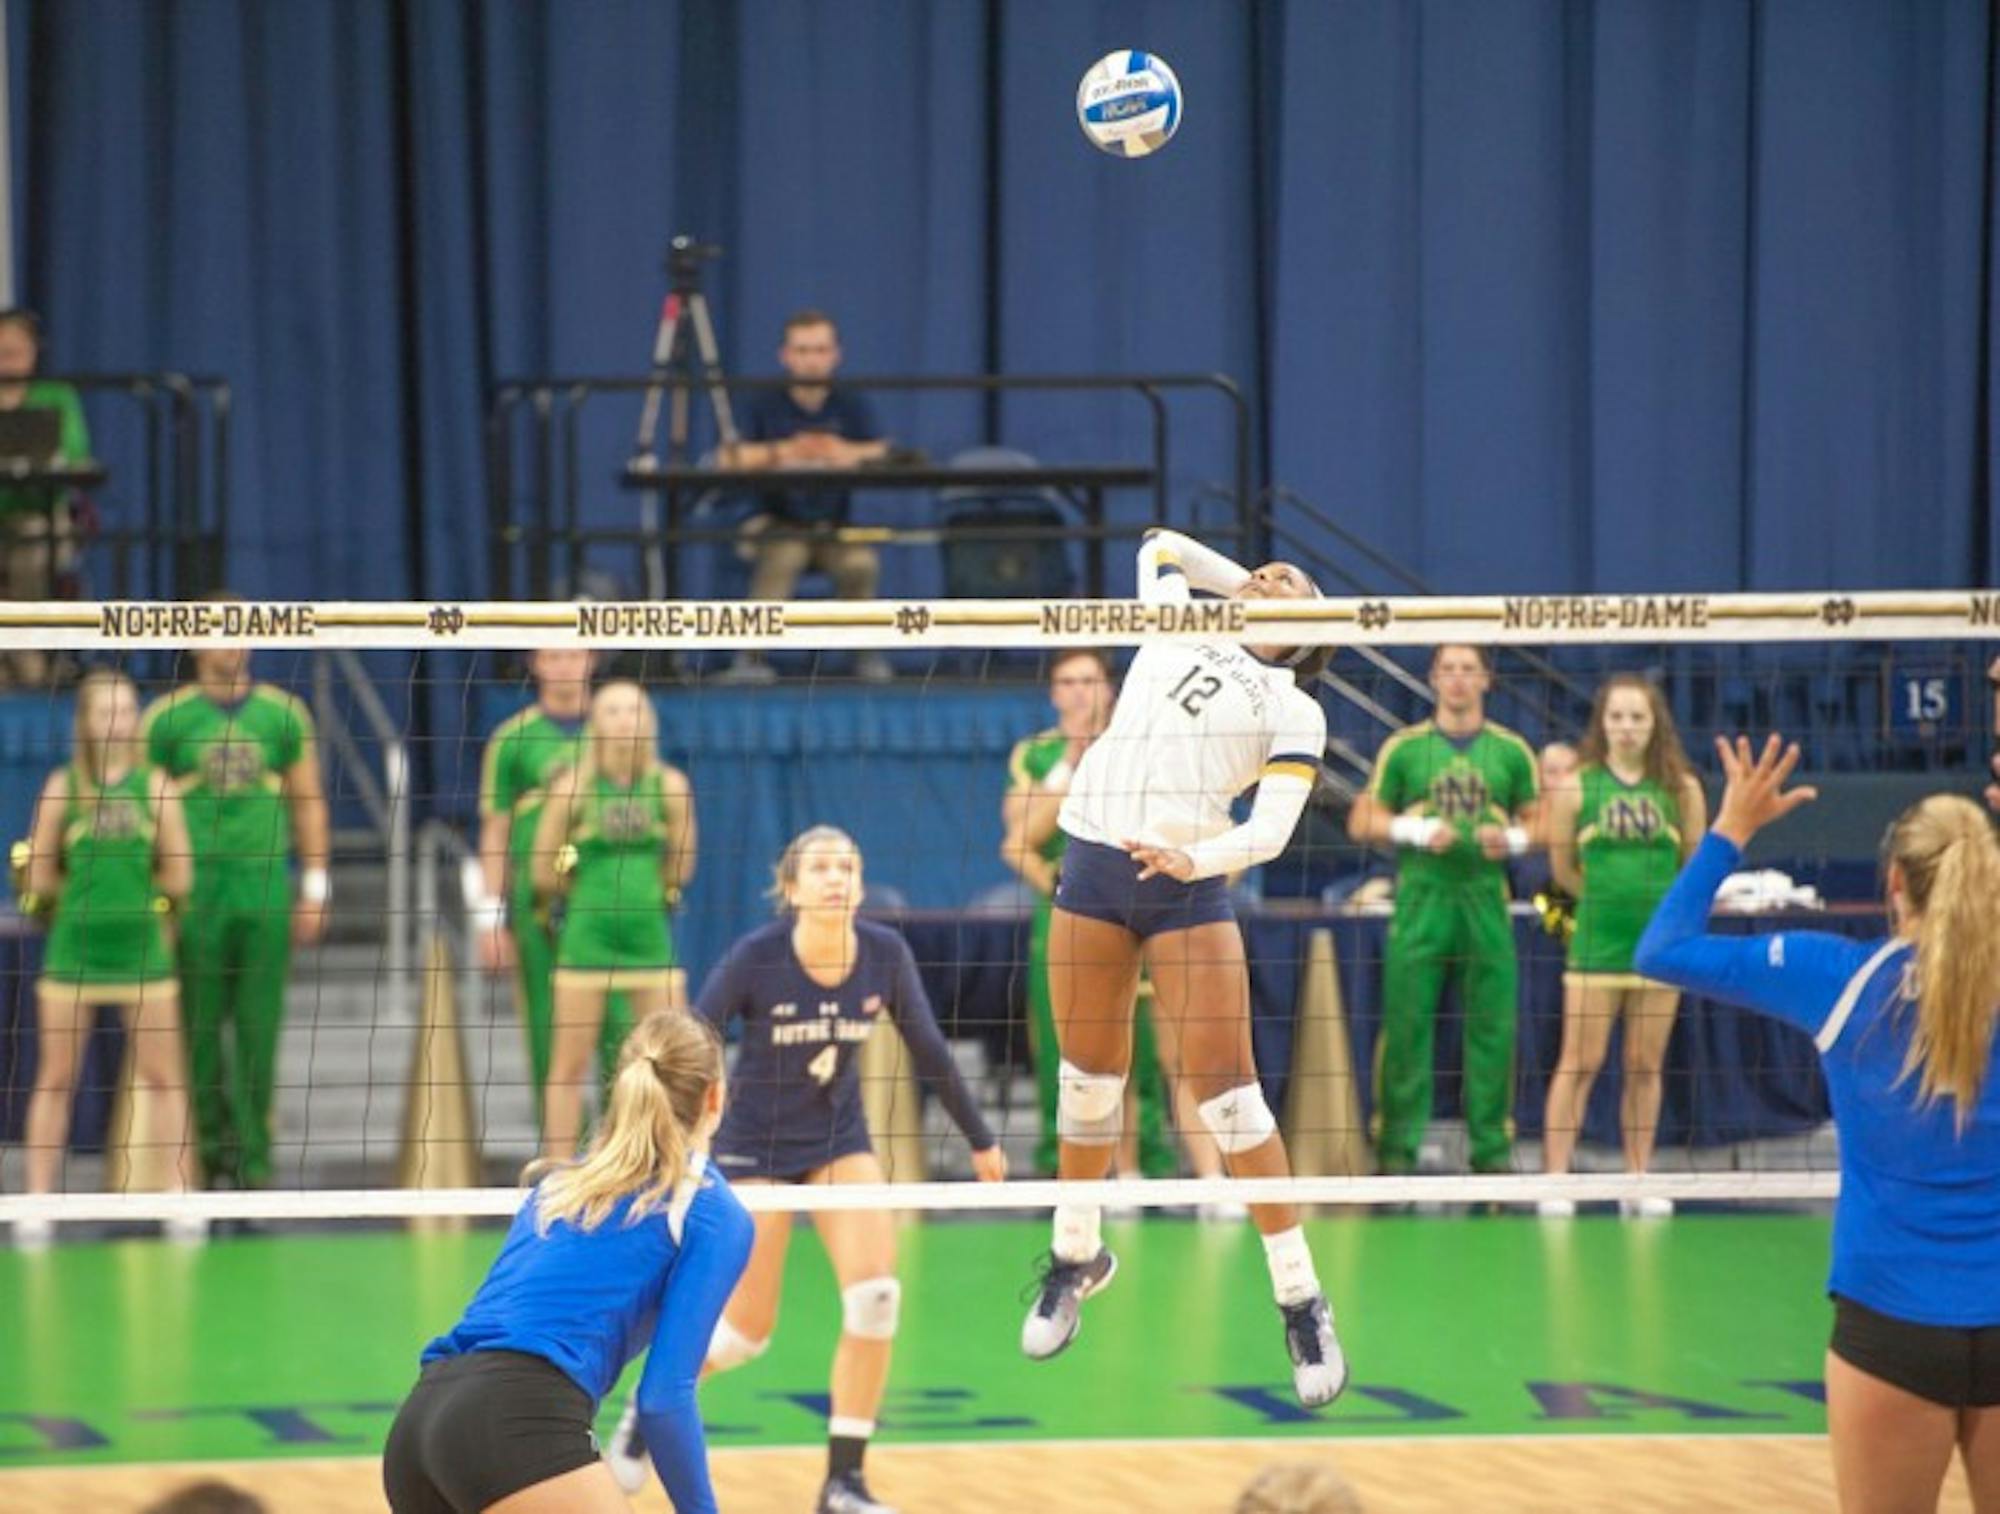 Irish freshman outside hitter Jemma Yeadon gets ready to spike the ball during Notre Dame’s 3-1 victory   over Duke on Sept. 30 at Purcell Pavilion. Yeadon tallied 18 kills, 29 digs and 7 blocks in the match.